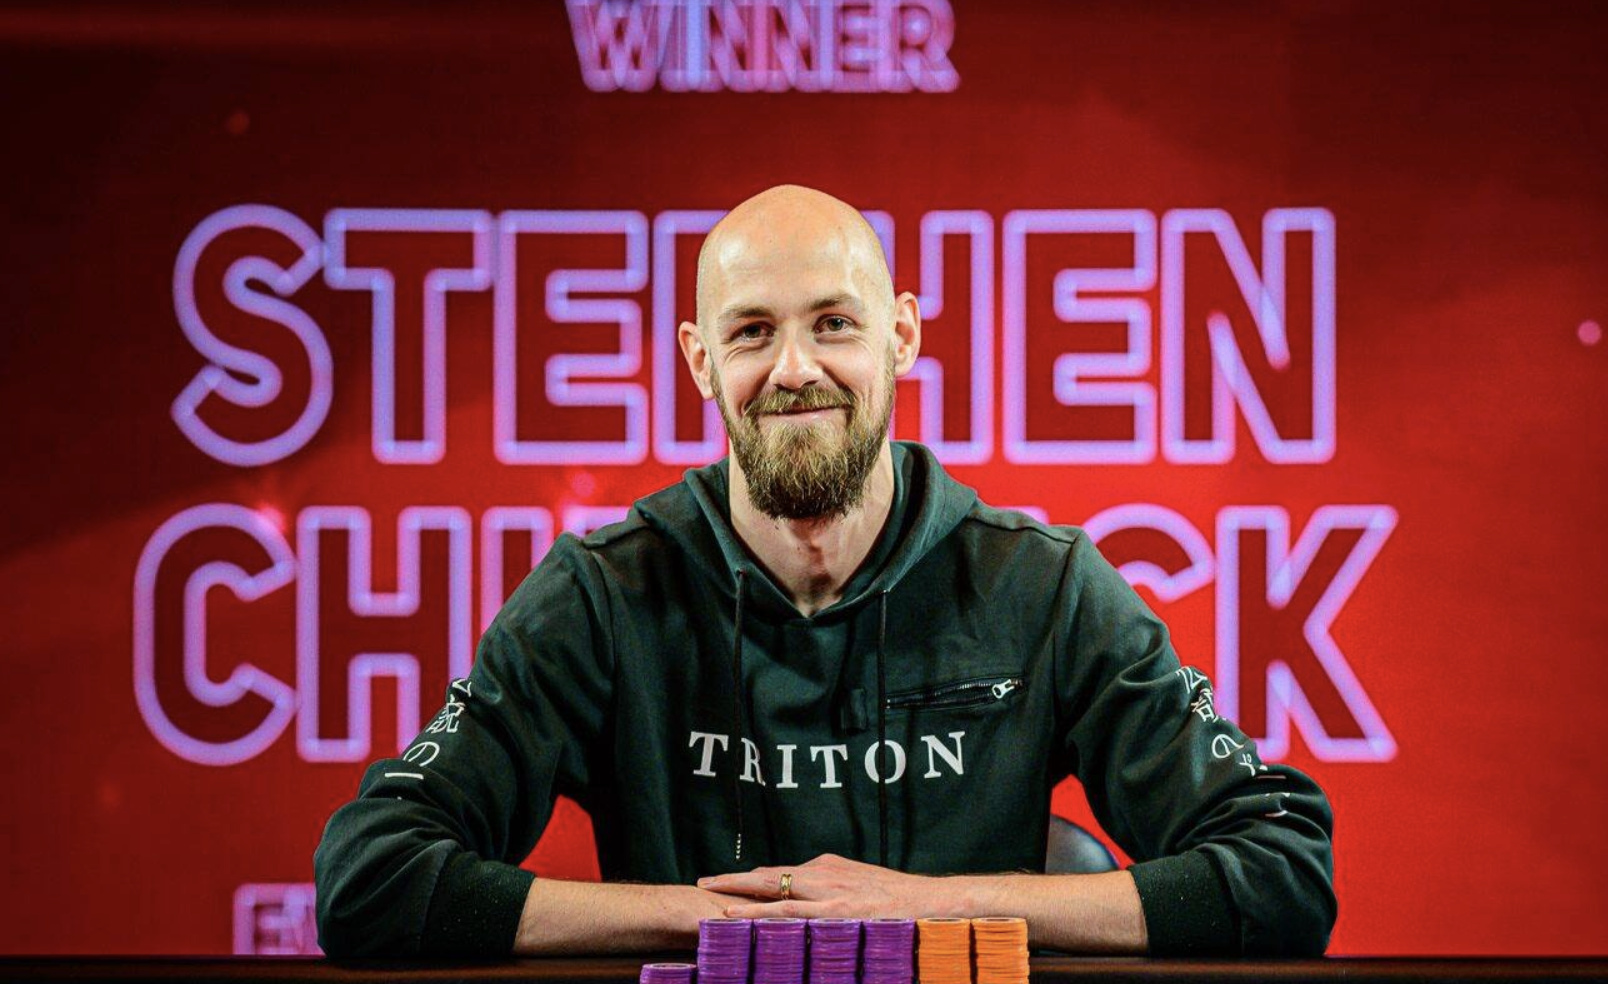 A show of appreciation to some of best poker players of all-time - Hendon Mob